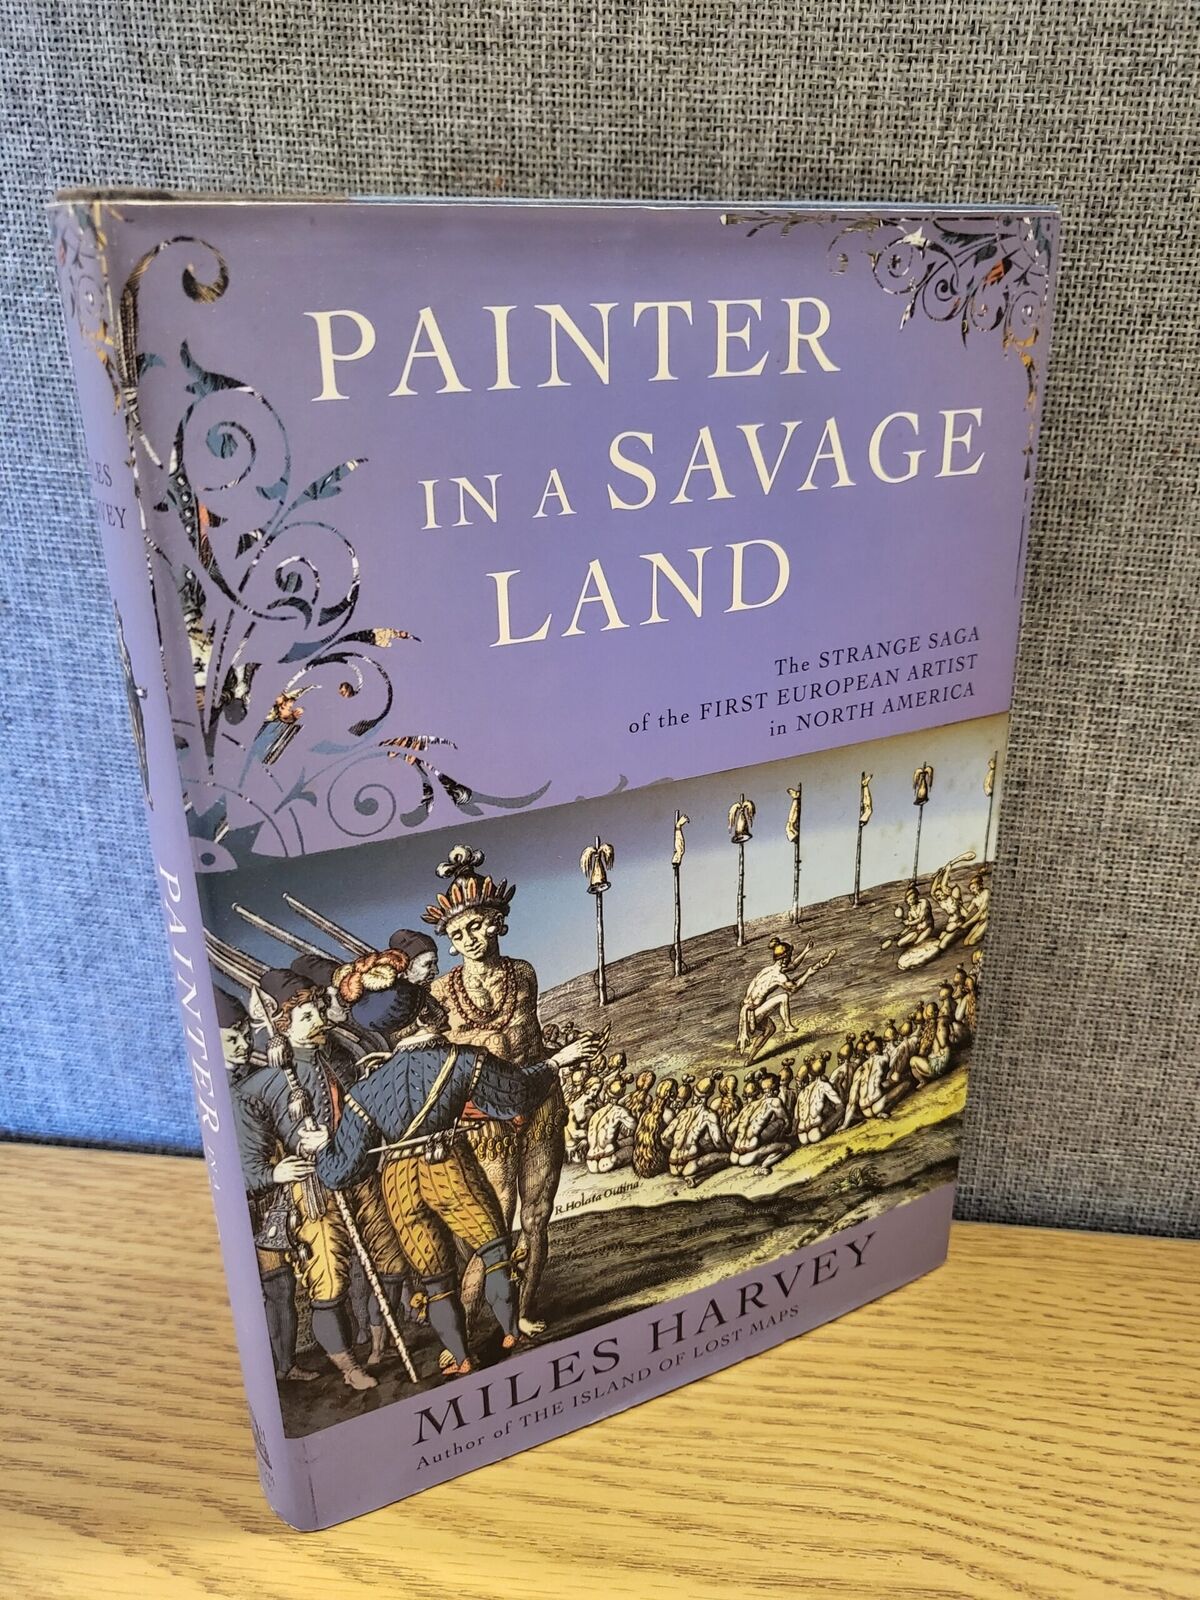 Painter in a Savage Land: The Strange Saga of the First European Artist in Nor..